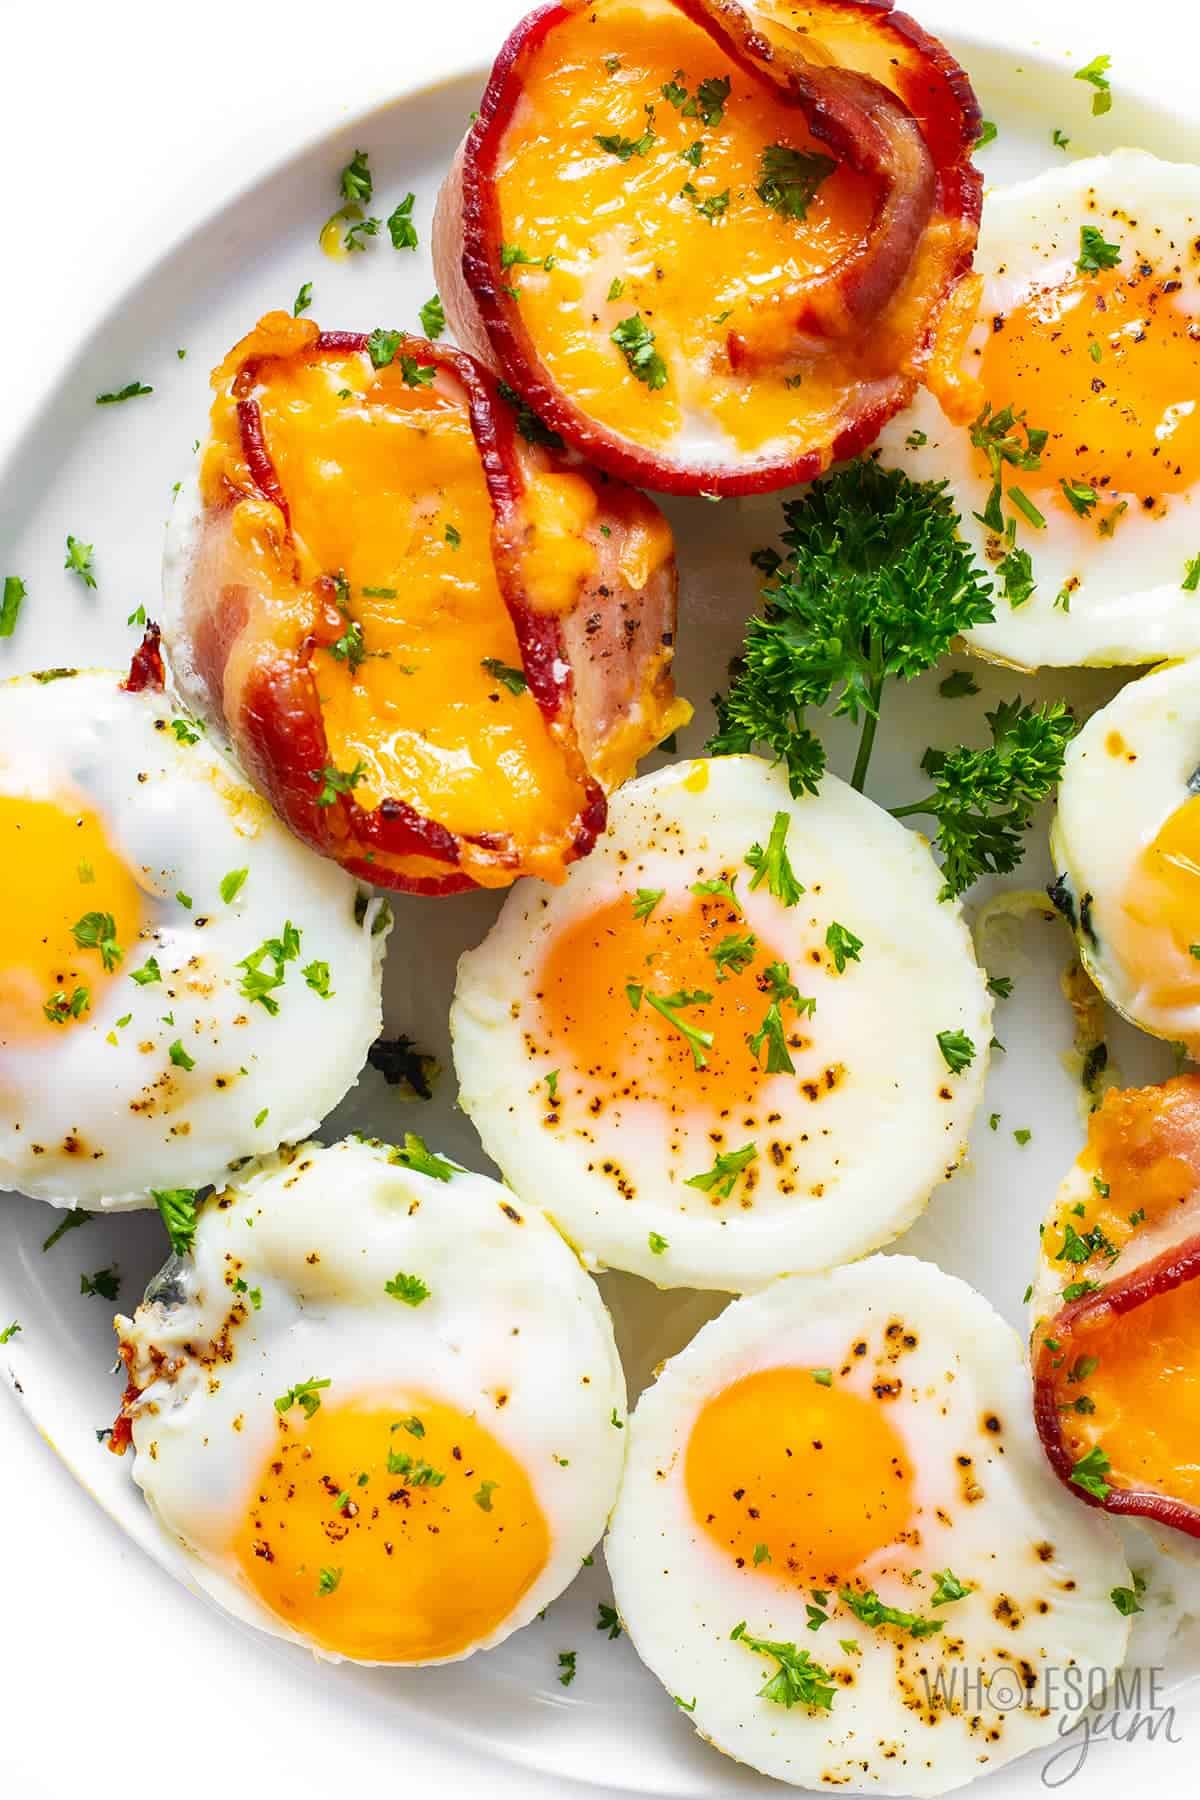 Oven baked eggs on a plate with garnish.